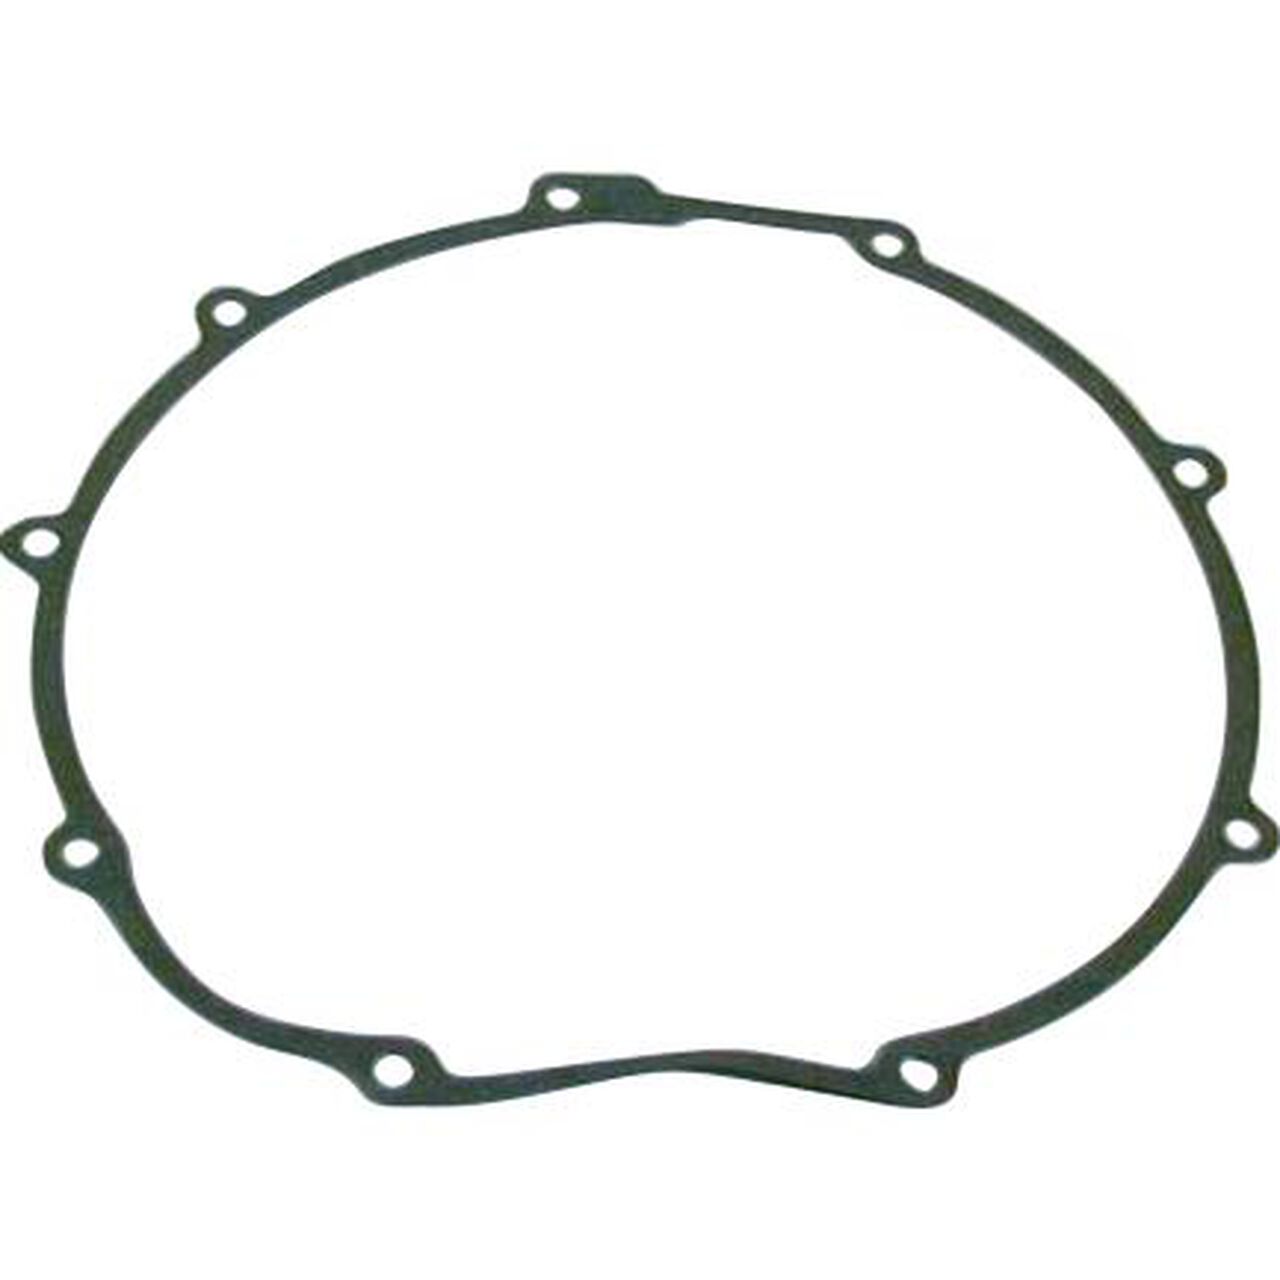 Italy for Aprilia MX 125 Clutch Cover Gasket from Athena 